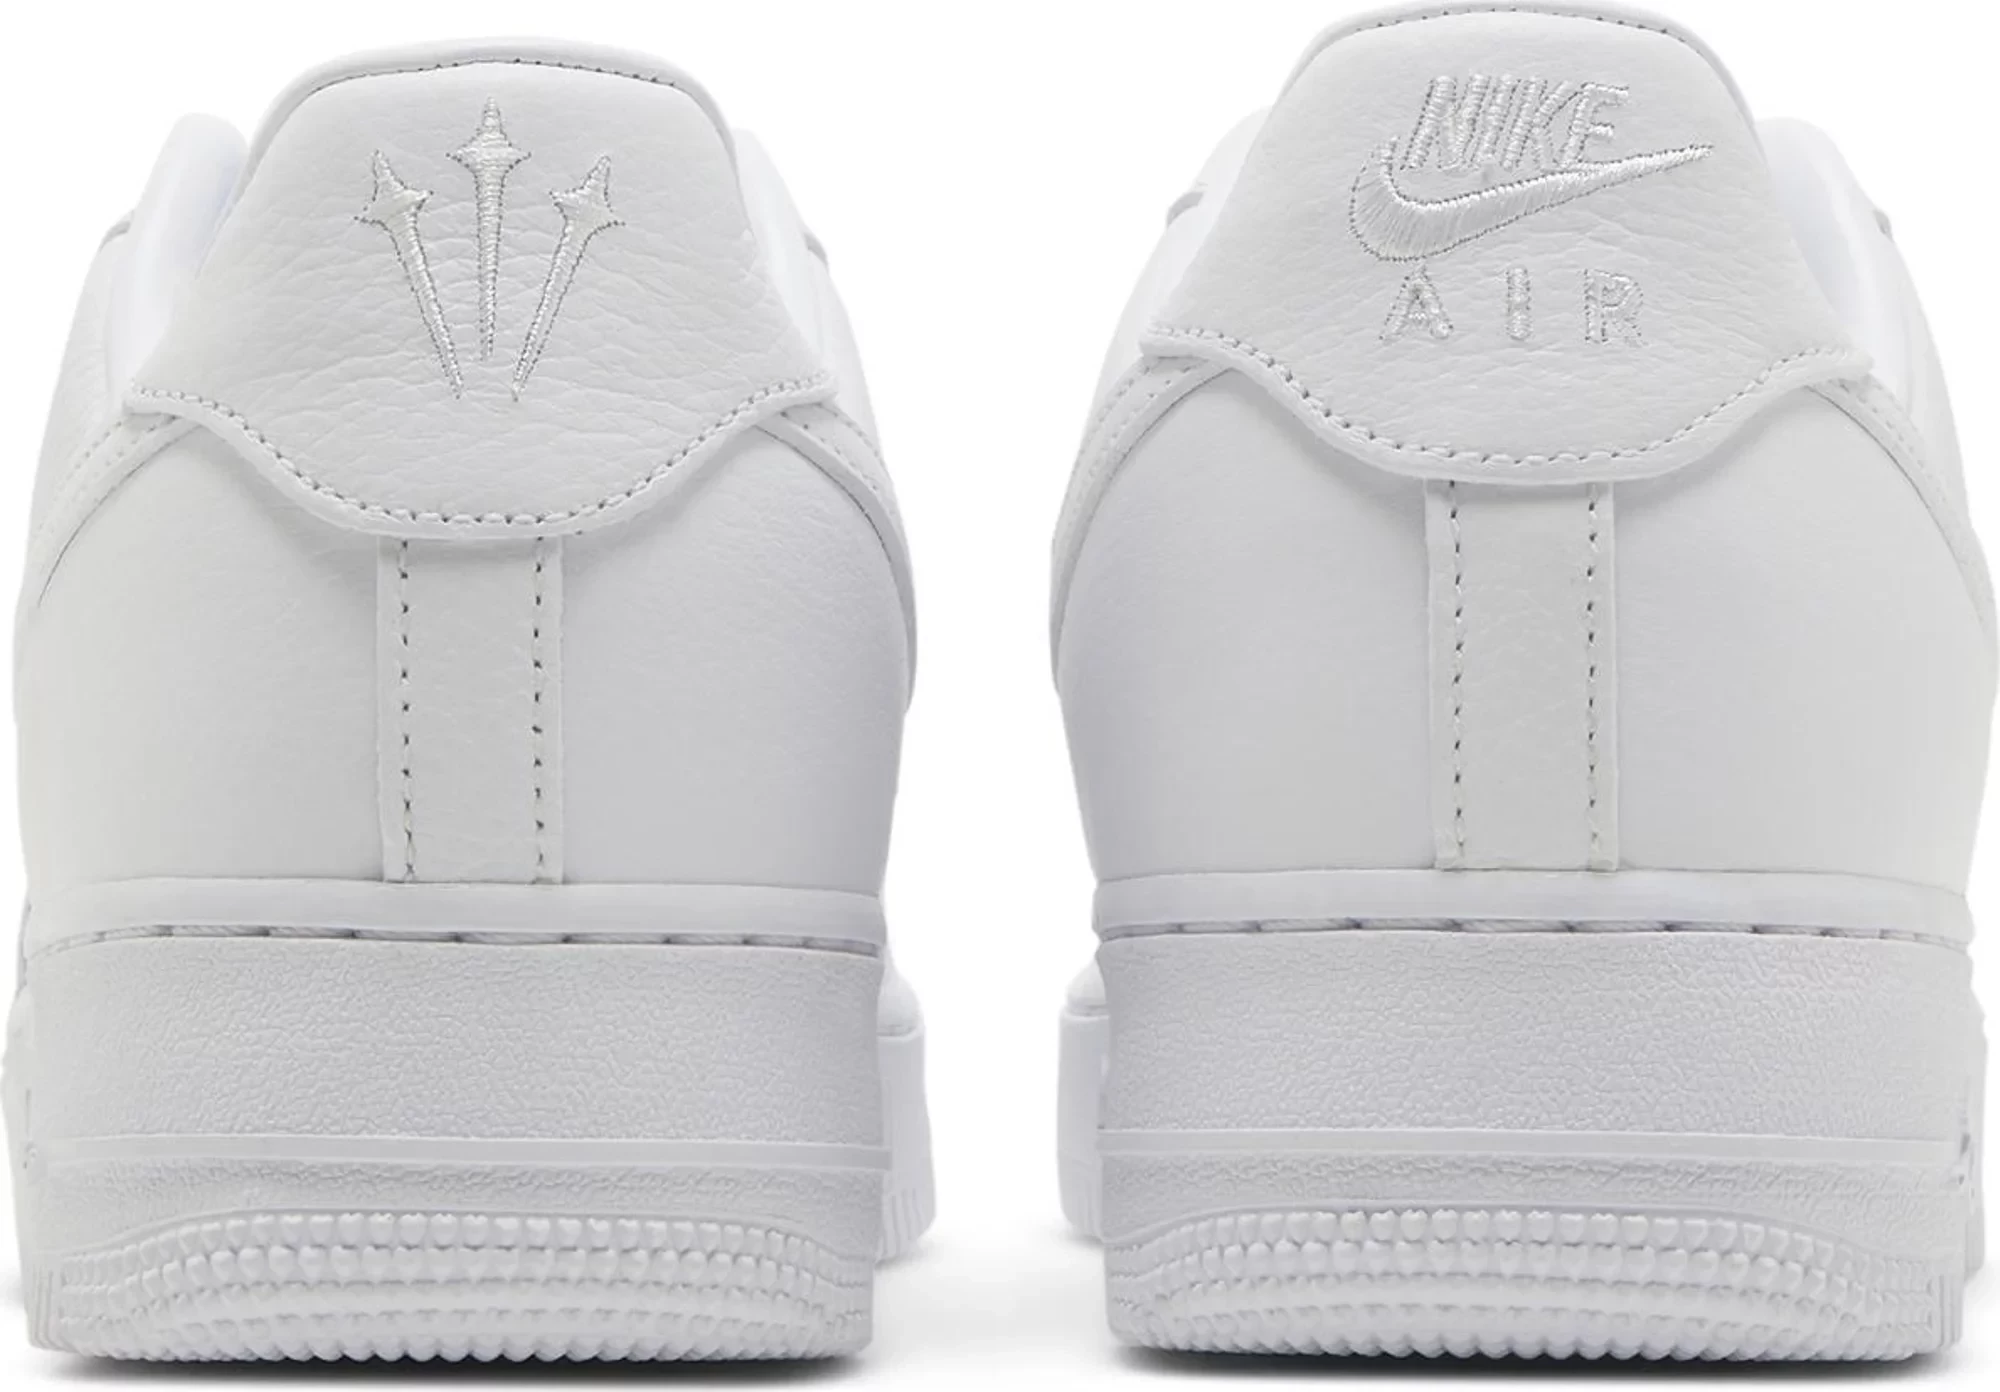 Hands On Drake's Certified Lover Boy NOCTA Nike Air Force 1